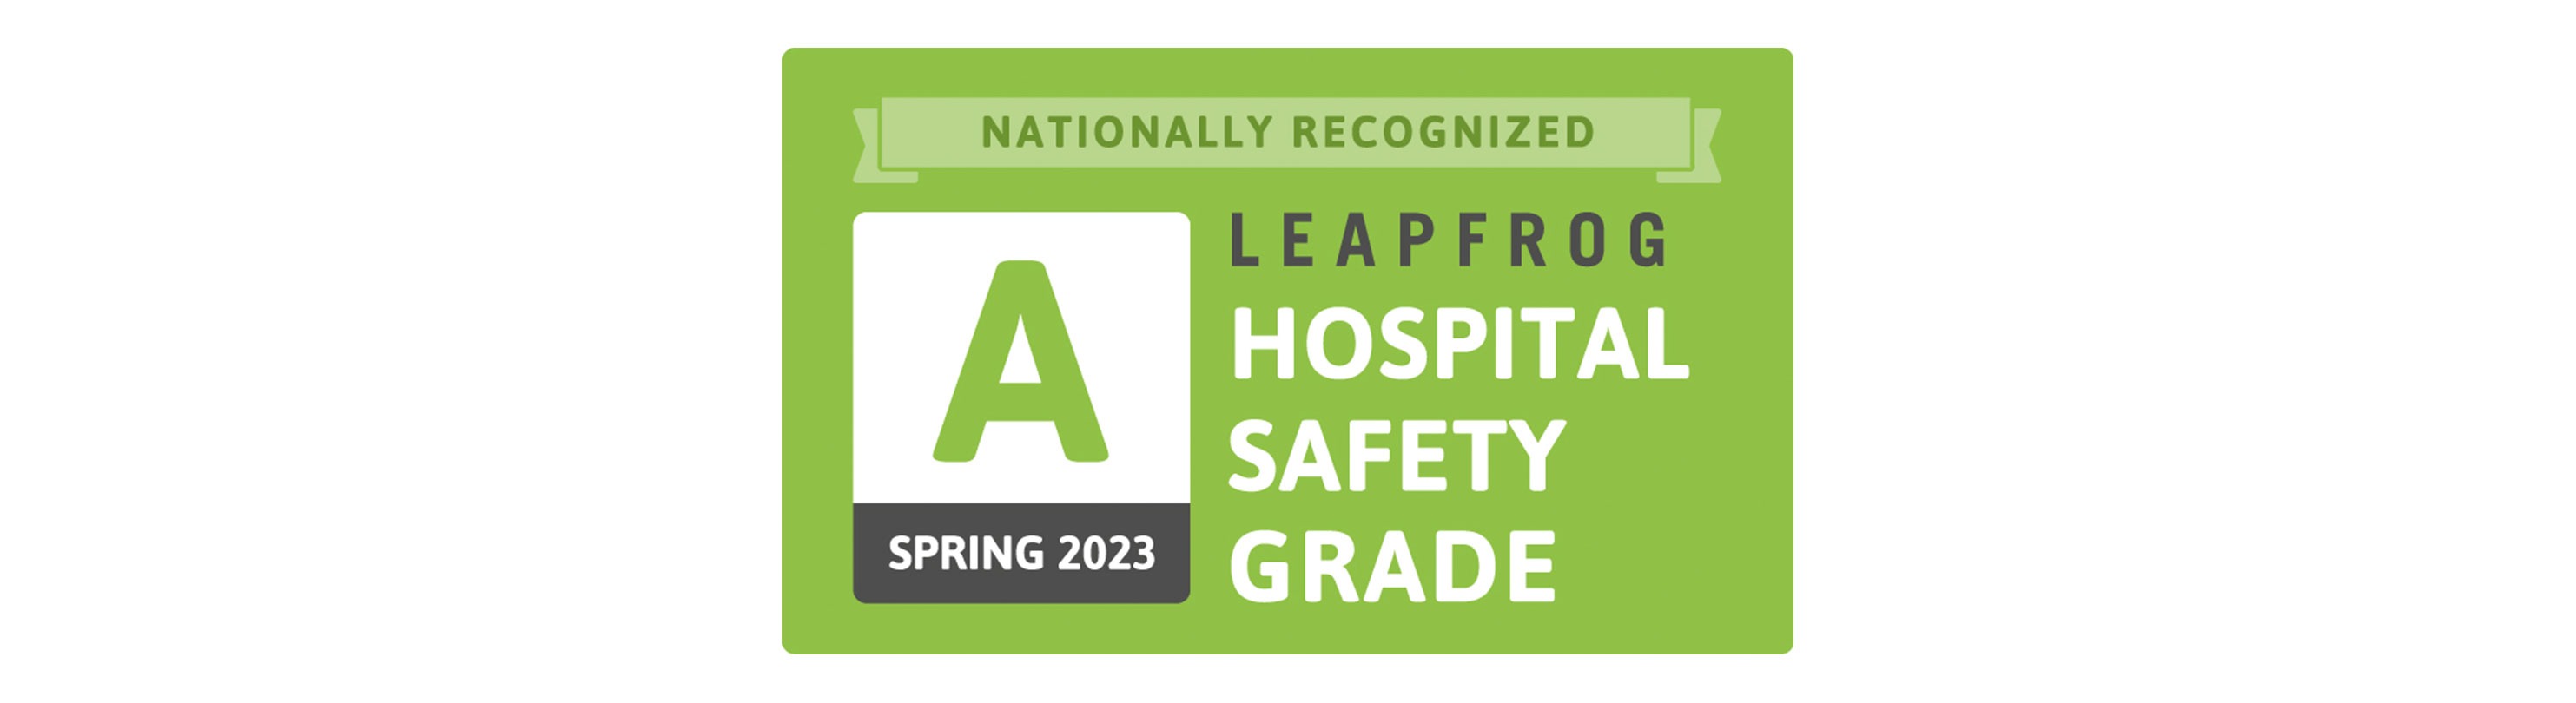 Windham Hospital Awarded Spring 2023 ‘A’ Hospital Safety Grade From Leapfrog Group